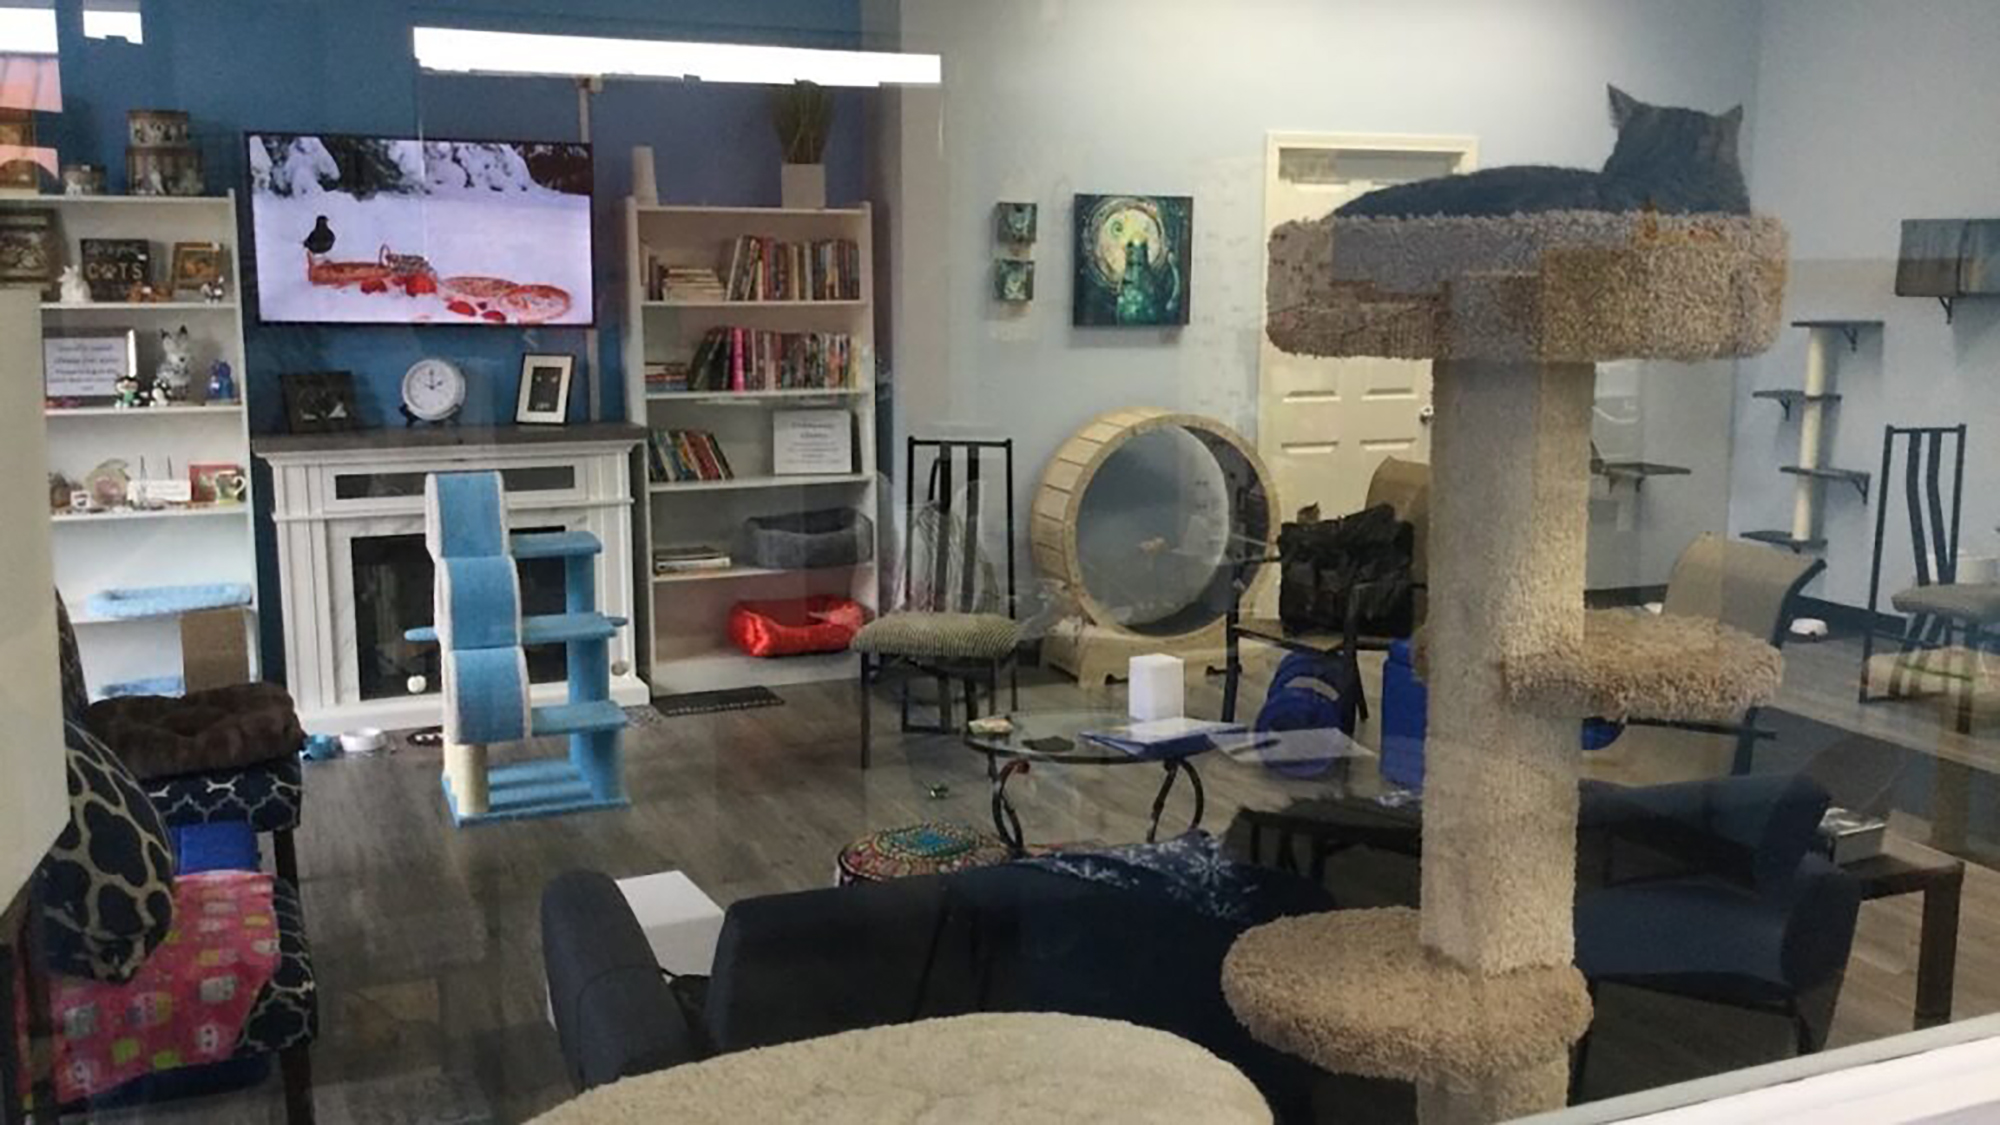 The Purrfect Oregon Cafe to Find Your New Cat Just Opened in the Valley